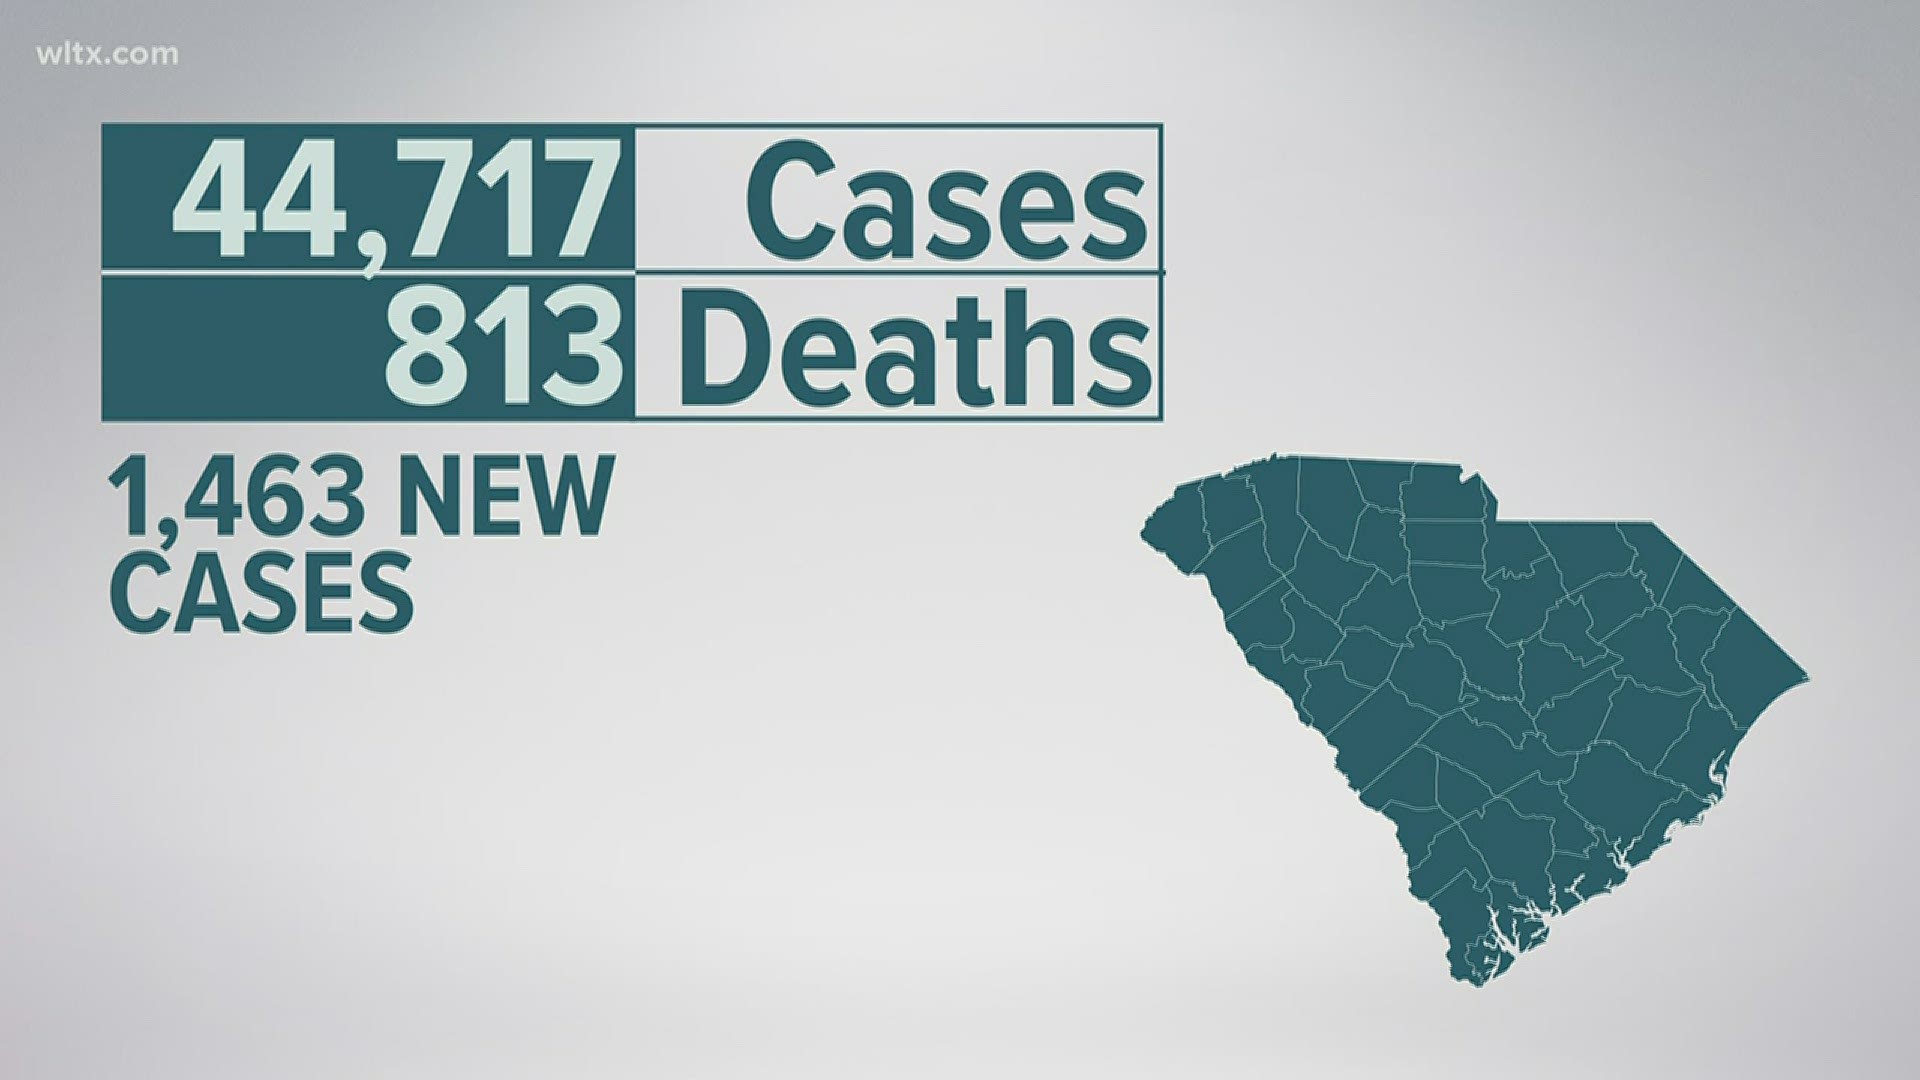 This brings the total number of confirmed cases to 44,717, probable cases to 130, confirmed deaths to 813, and 7 probable deaths